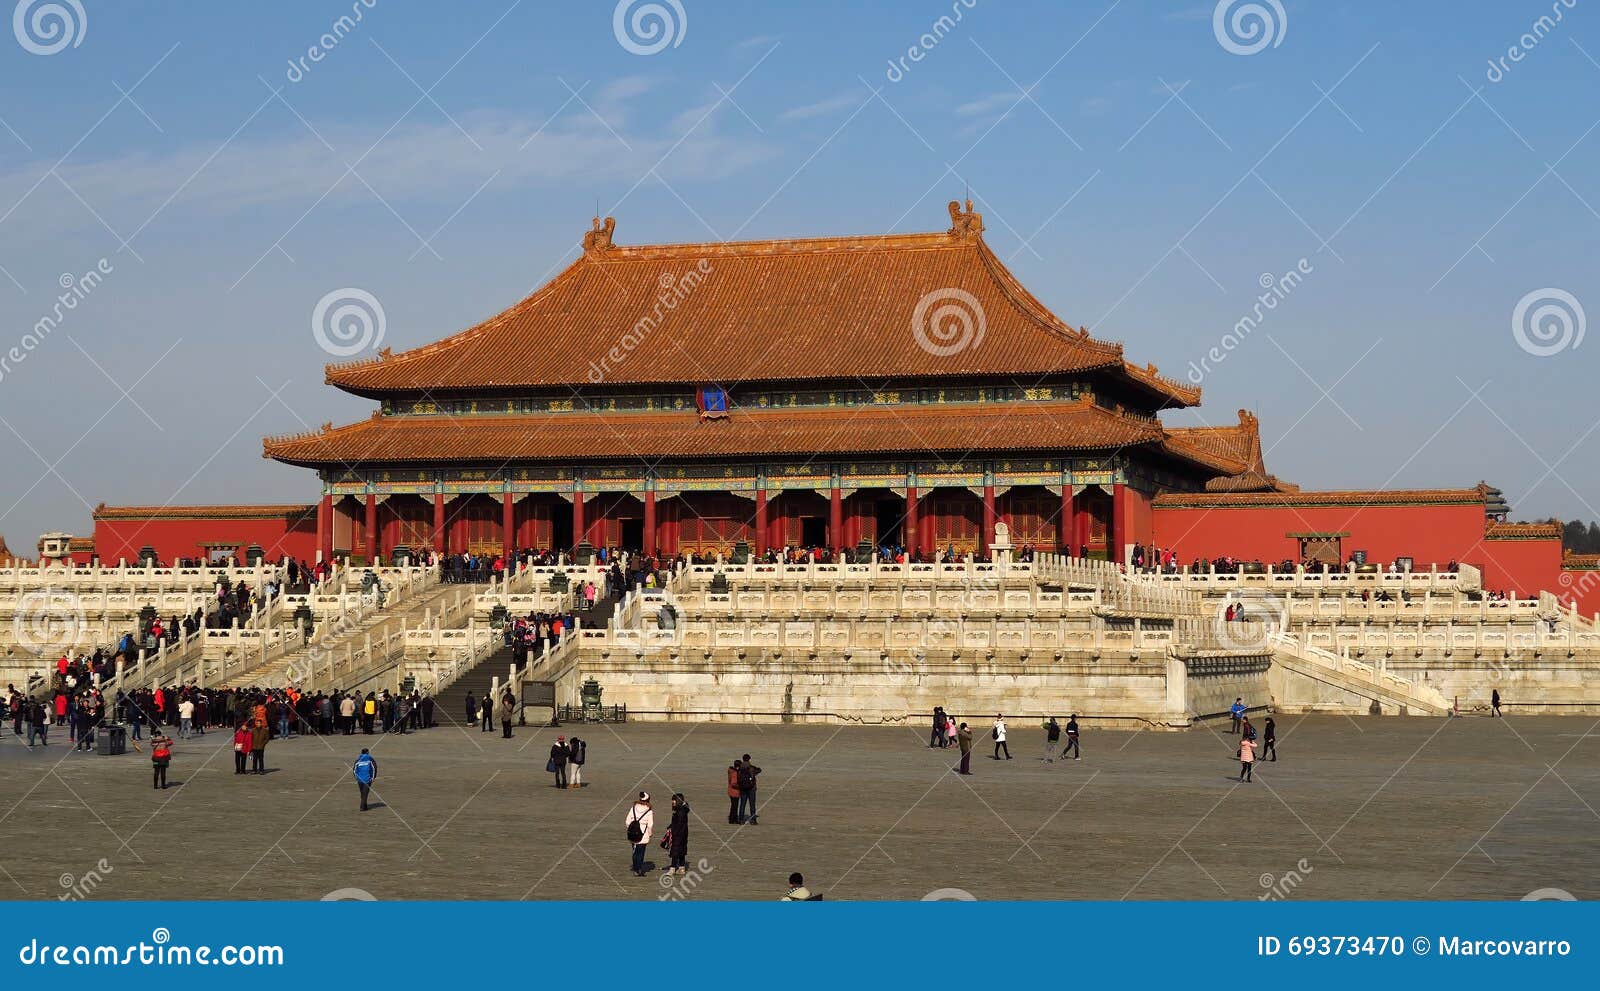 Forbidden City, Beijing, China. BEIJING, CHINA - JANUARY 10, 2016: people in Tiananmen Square under the historical architecture of the Forbidden City